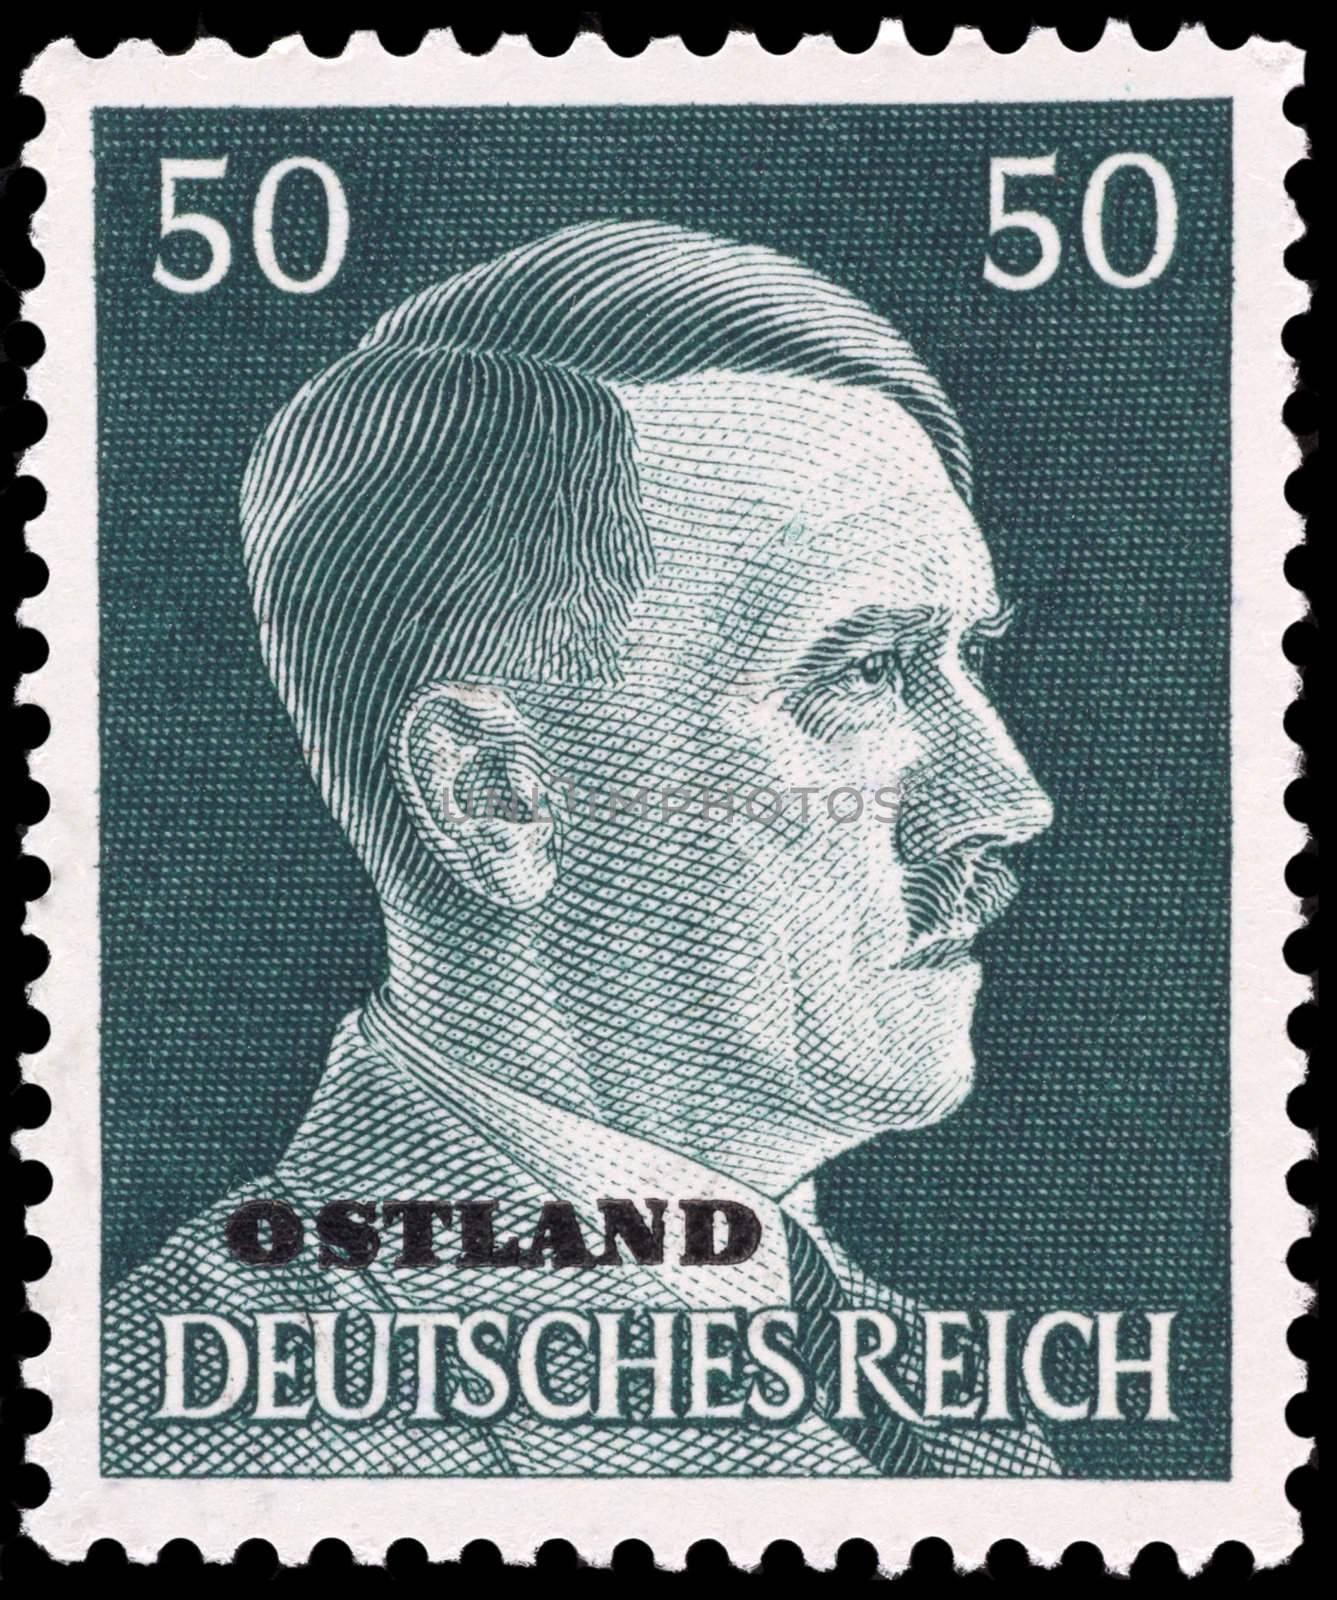 Adolf Hitler on German stamp isolated in black